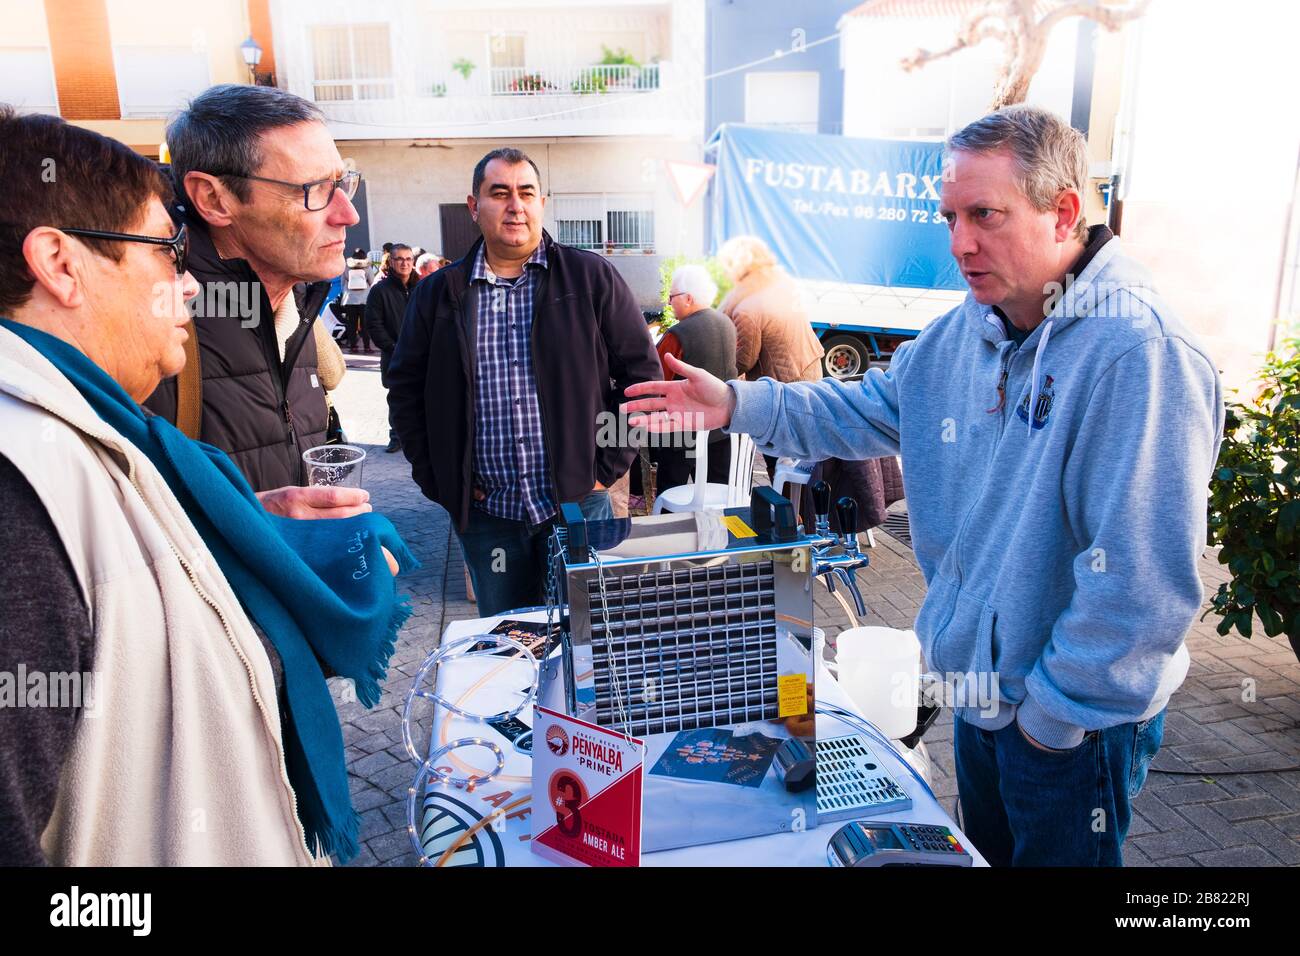 Brewer from micro craft brewery promoting his beer in a village Spanish market Stock Photo